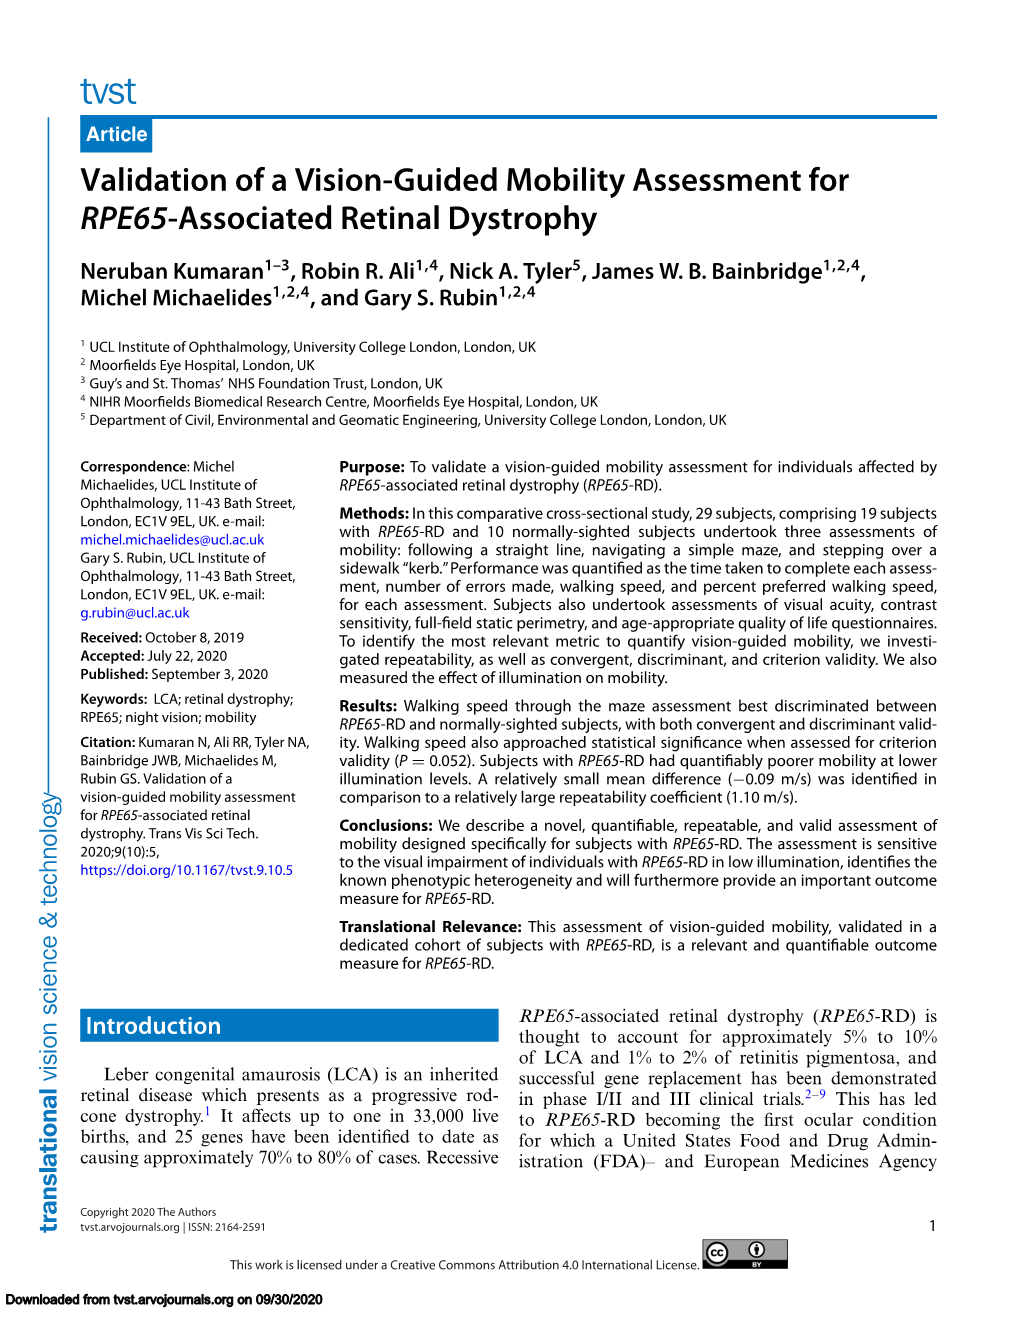 Validation of a Vision-Guided Mobility Assessment for RPE65-Associated Retinal Dystrophy